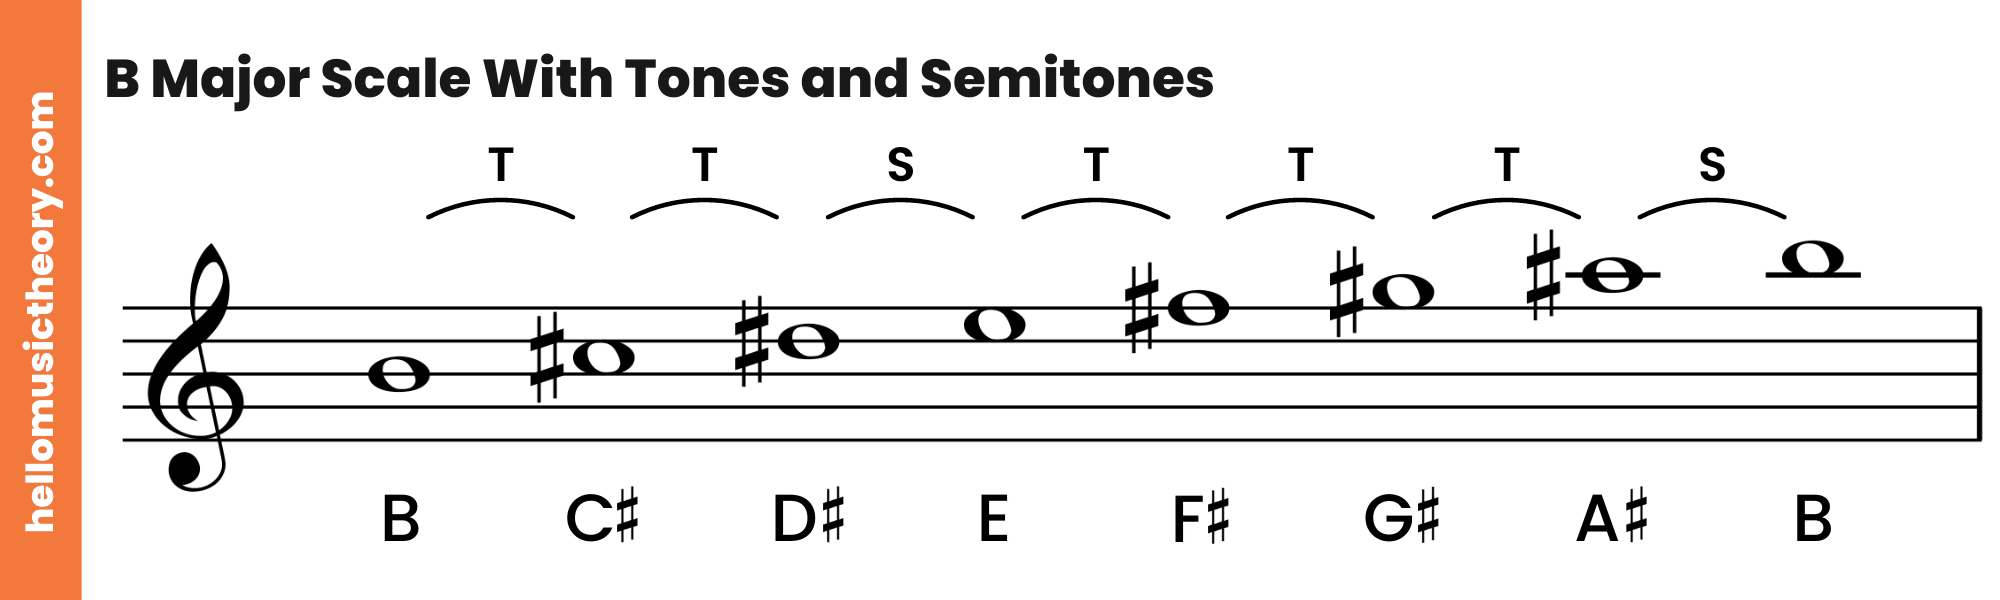 B Major Scale Treble Clef With Tones and Semitones